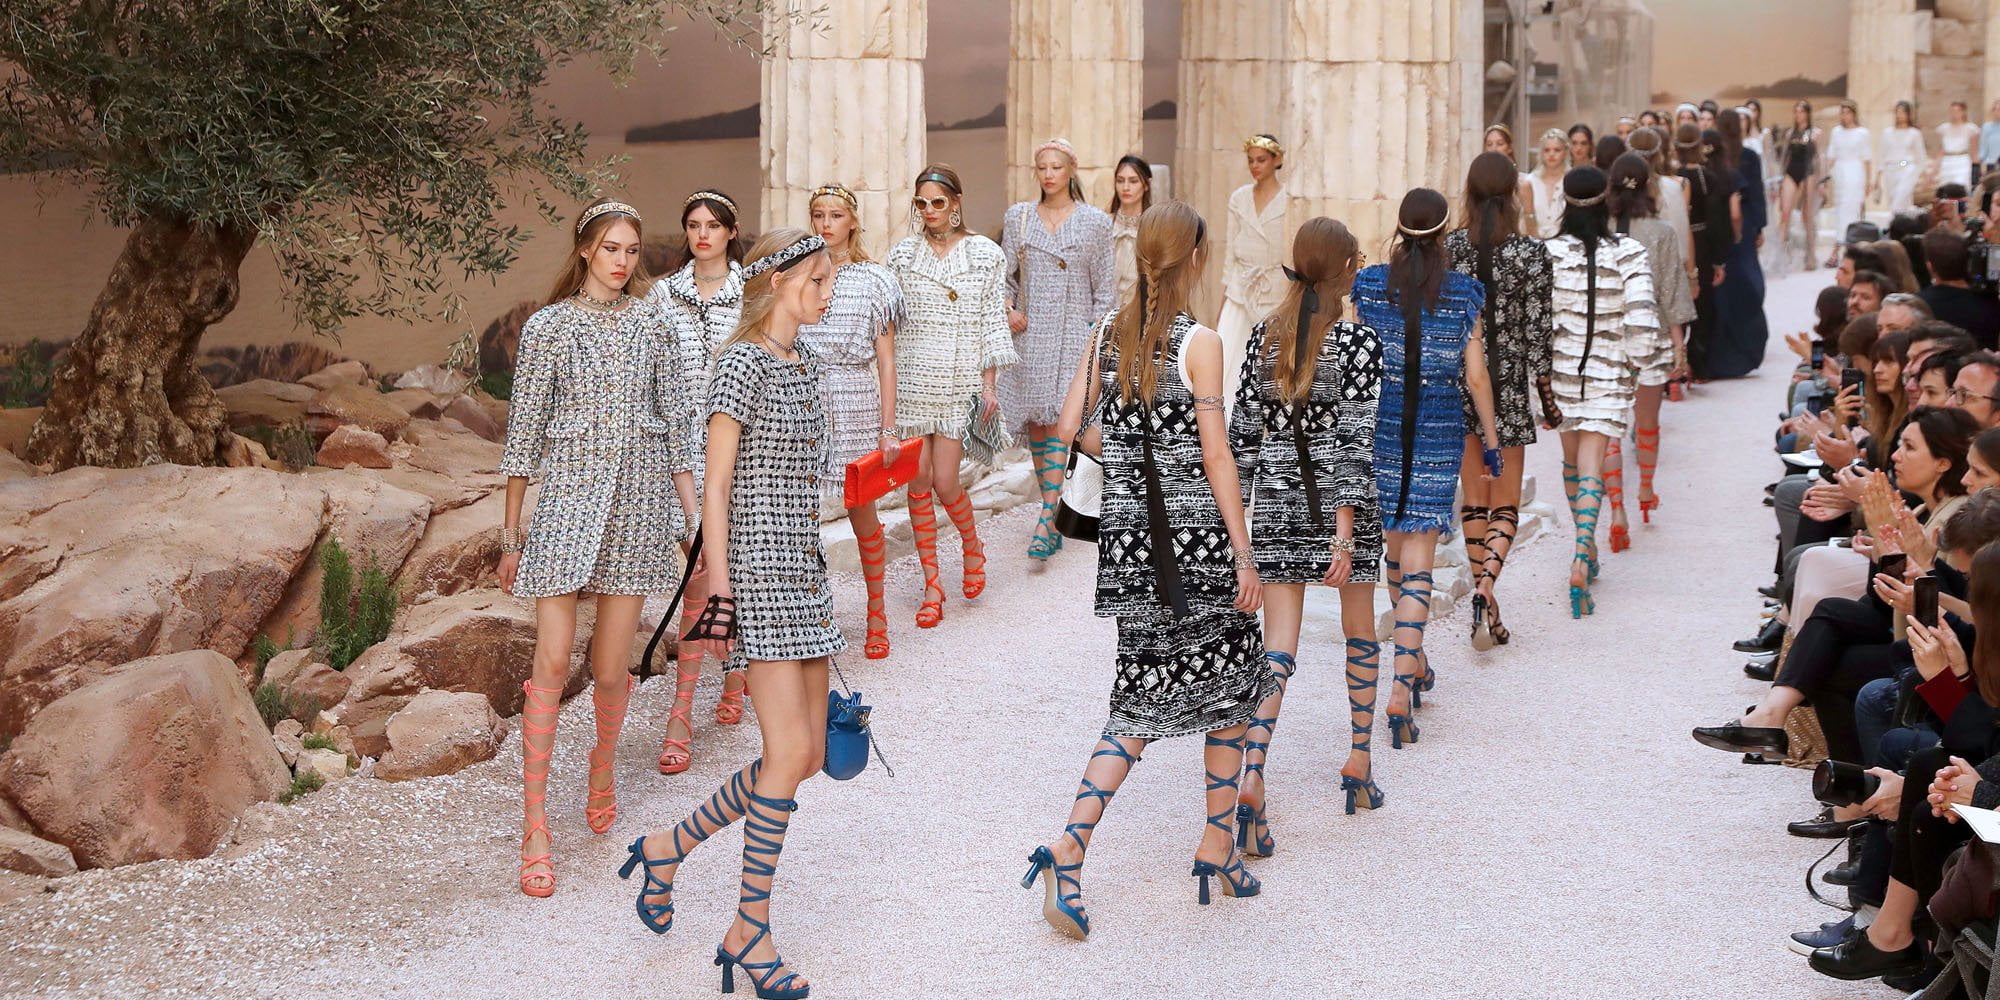 Louis Vuitton Cruise 2020 Runway Bag Collection - Spotted Fashion